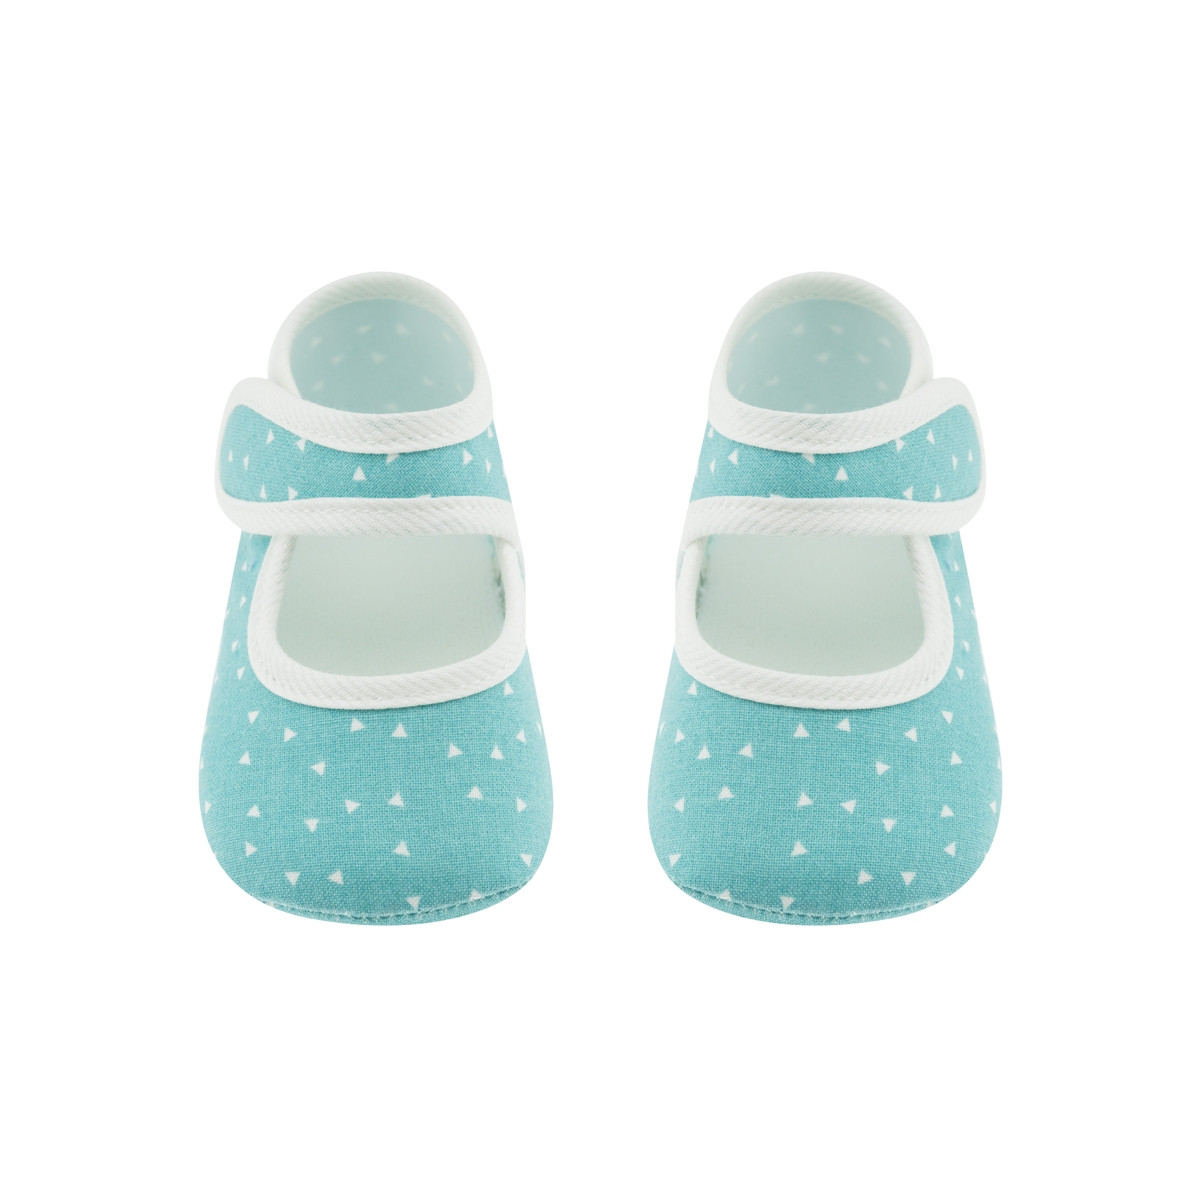 SUMMER BABY SHOES MOD.337 TURQUOISE CAMBRASS - 2